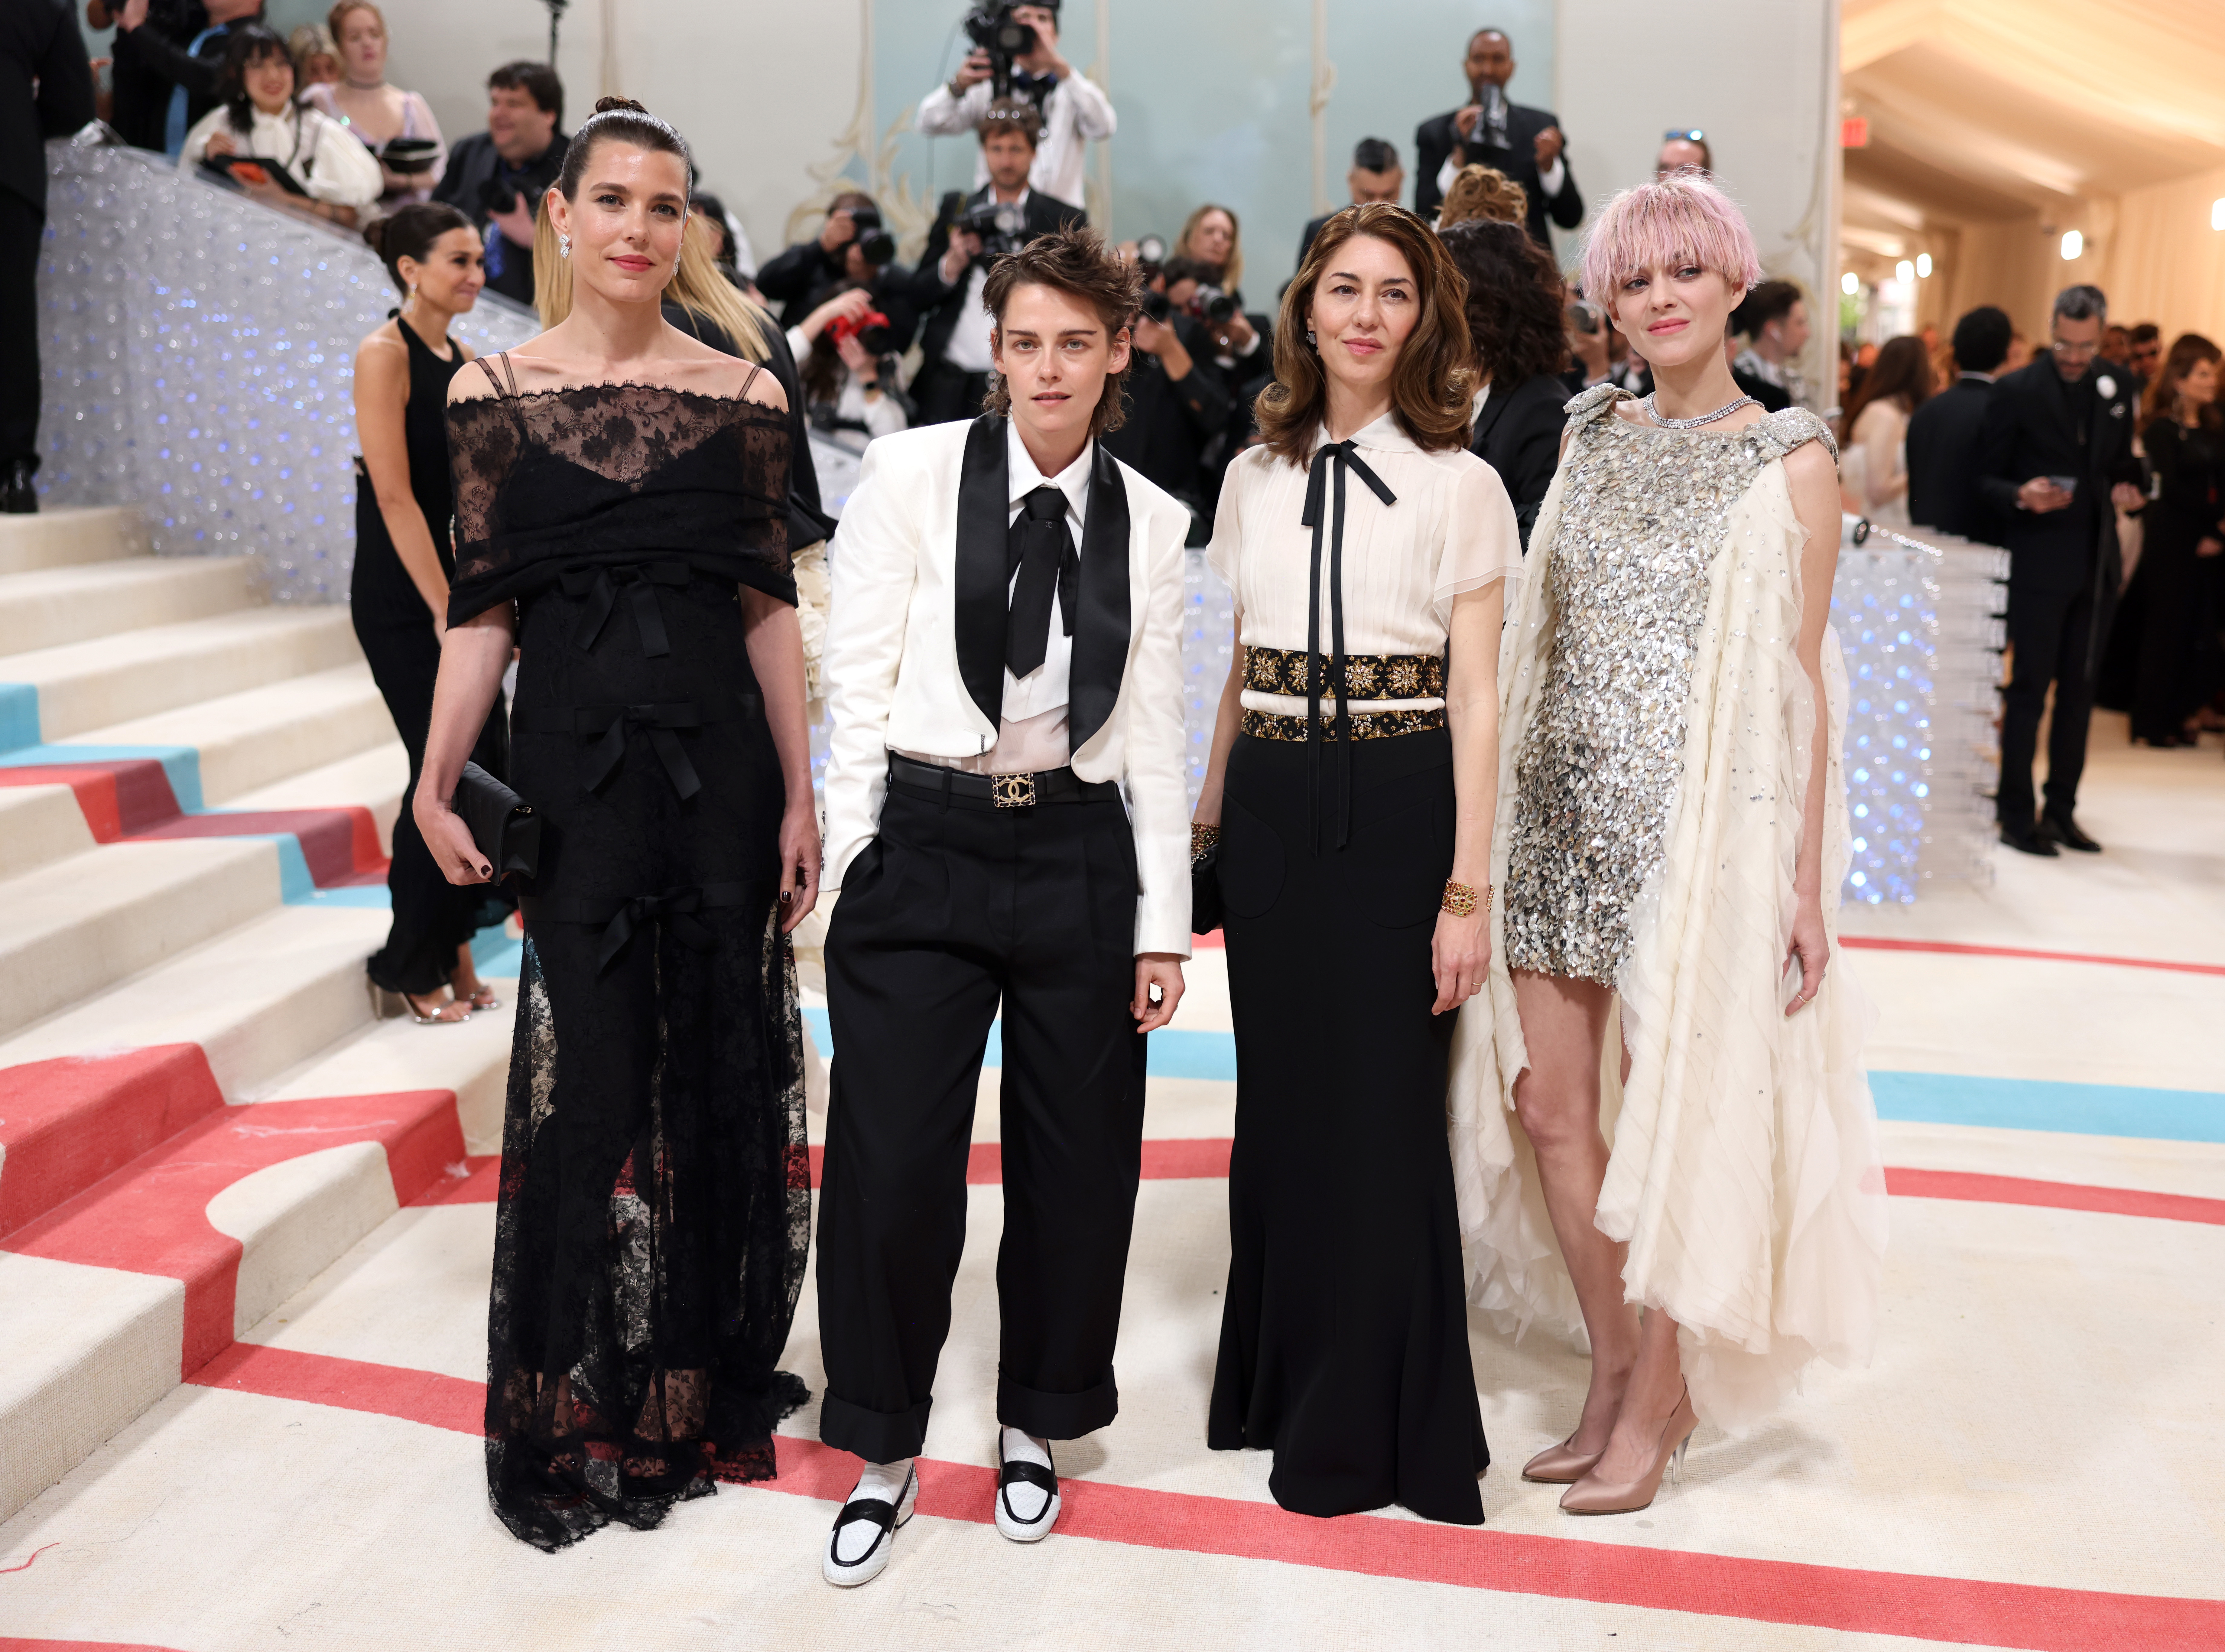 Karl Lagerfeld: The many muses of the Chanel boss, Ents & Arts News